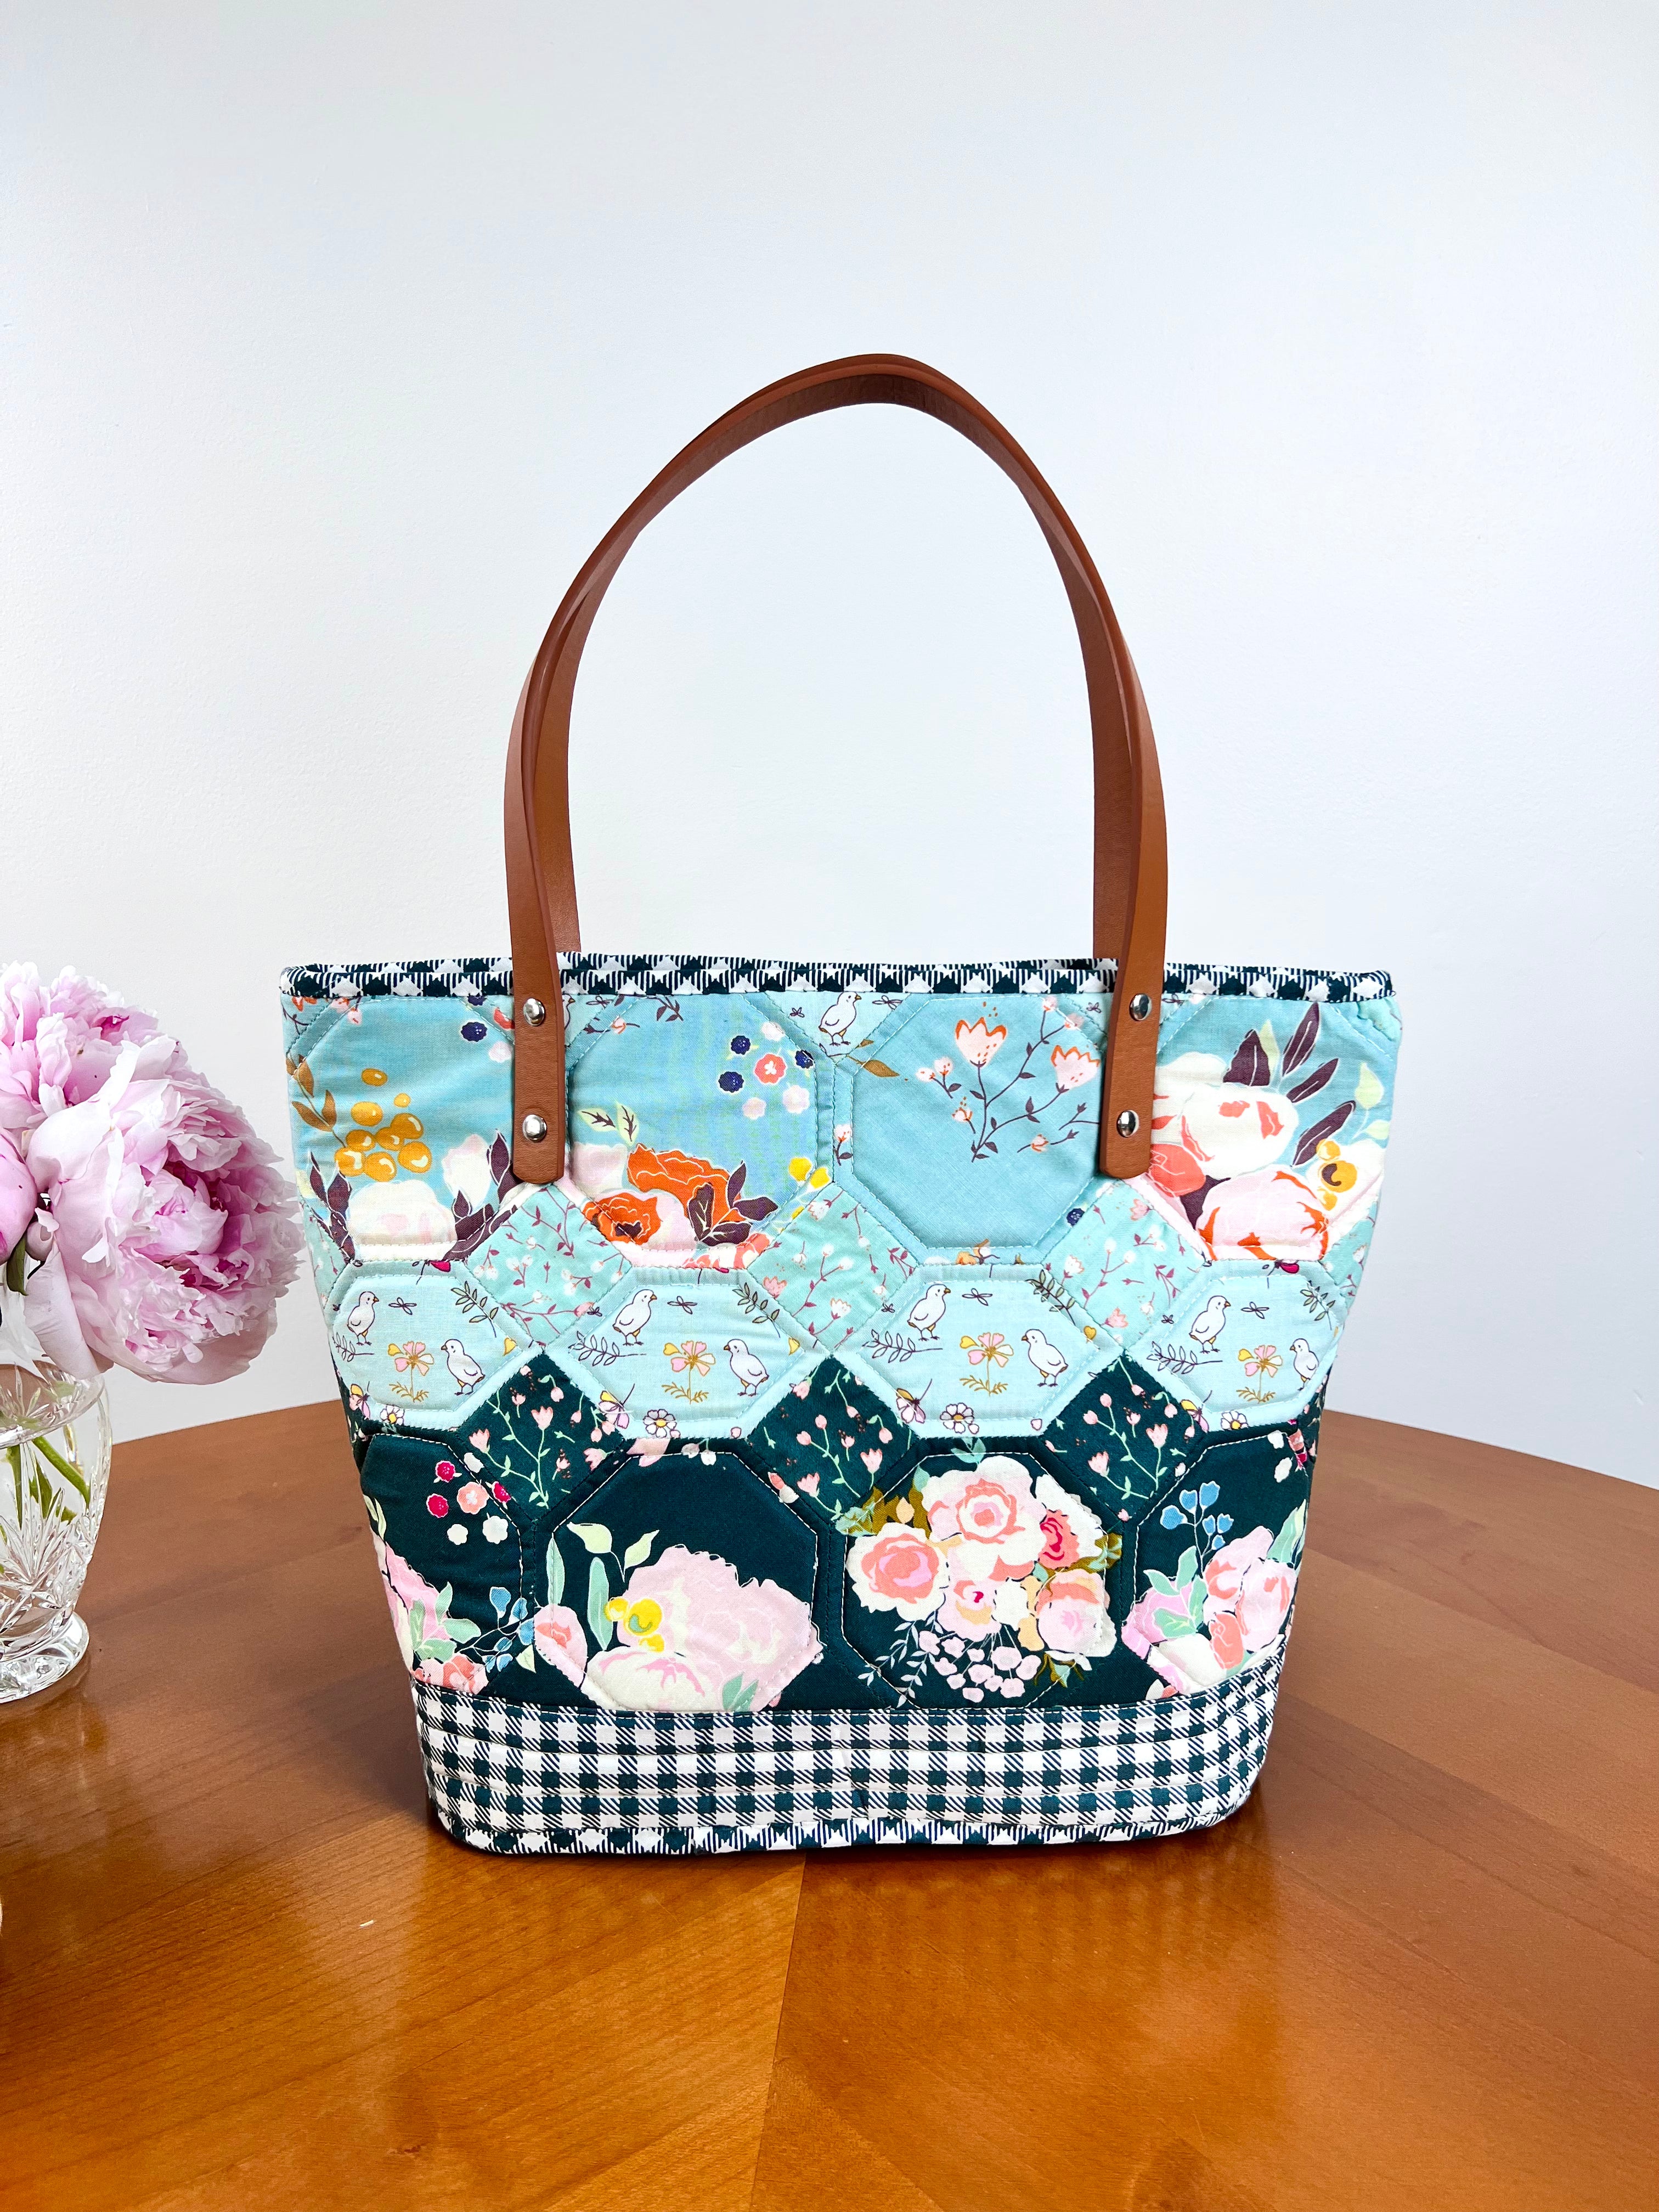 Patchwork Quilted Bags  Handmade, Hand Quilted, Heirloom Quality